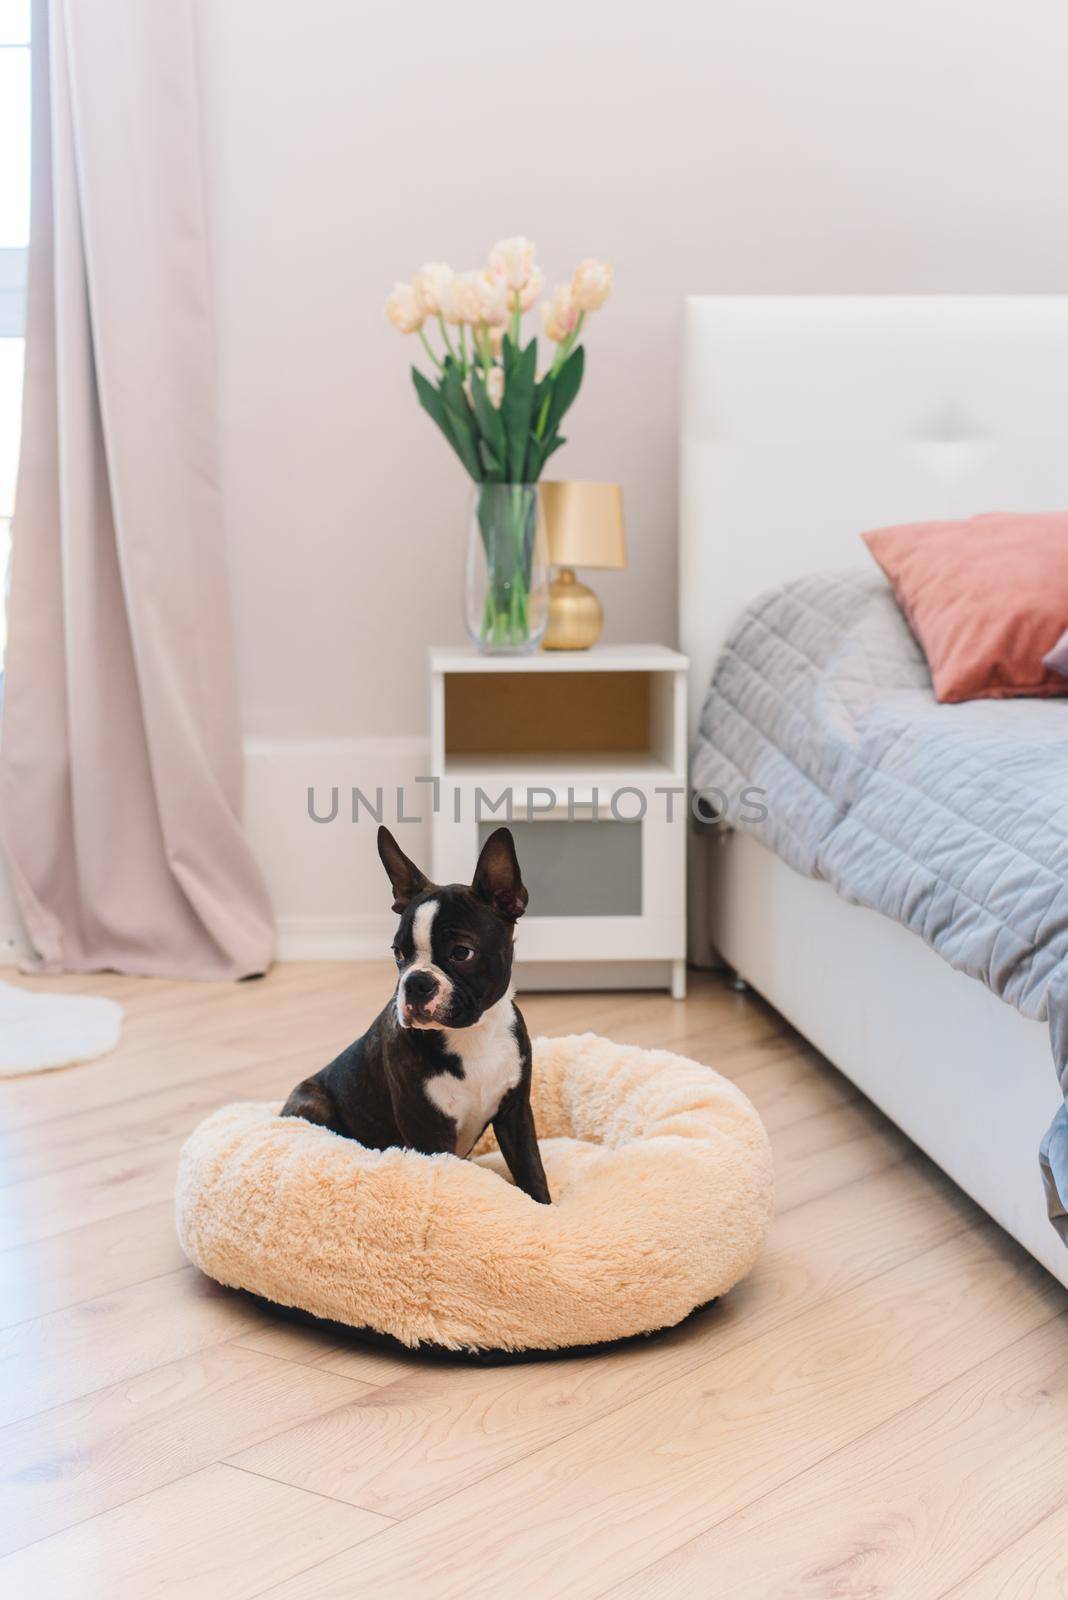 Adorable Boston Terrier dog sitting on a cozy dog bed. Domestic adorable pet concept.